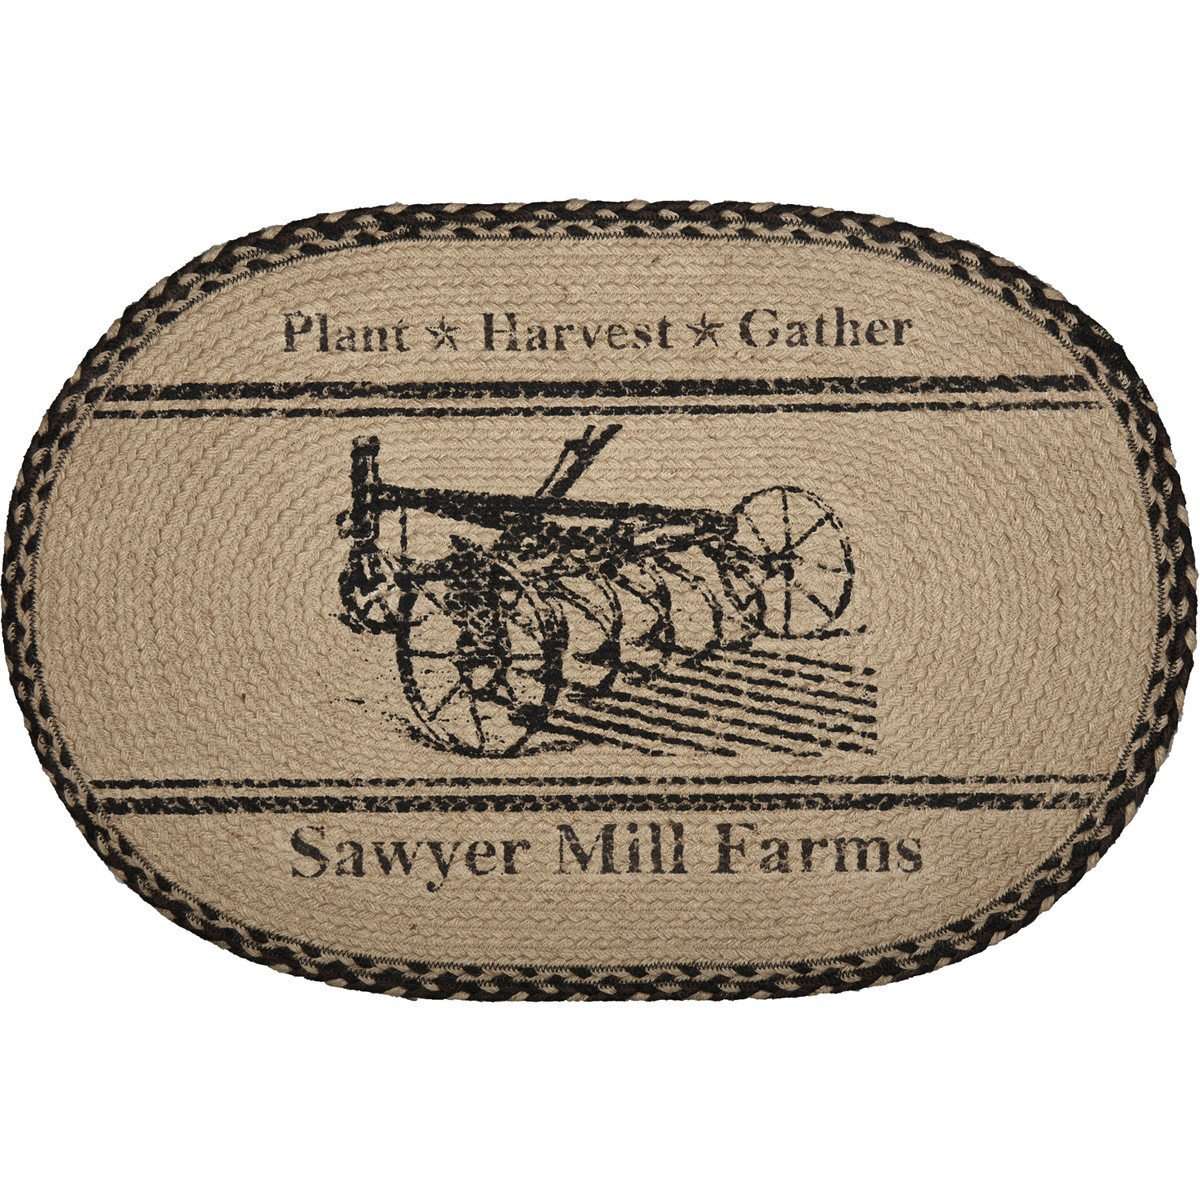 Sawyer Mill Charcoal Plow Braided Jute Rug Oval/Rect VHC Brands rugs VHC Brands 20x30 inch Oval 